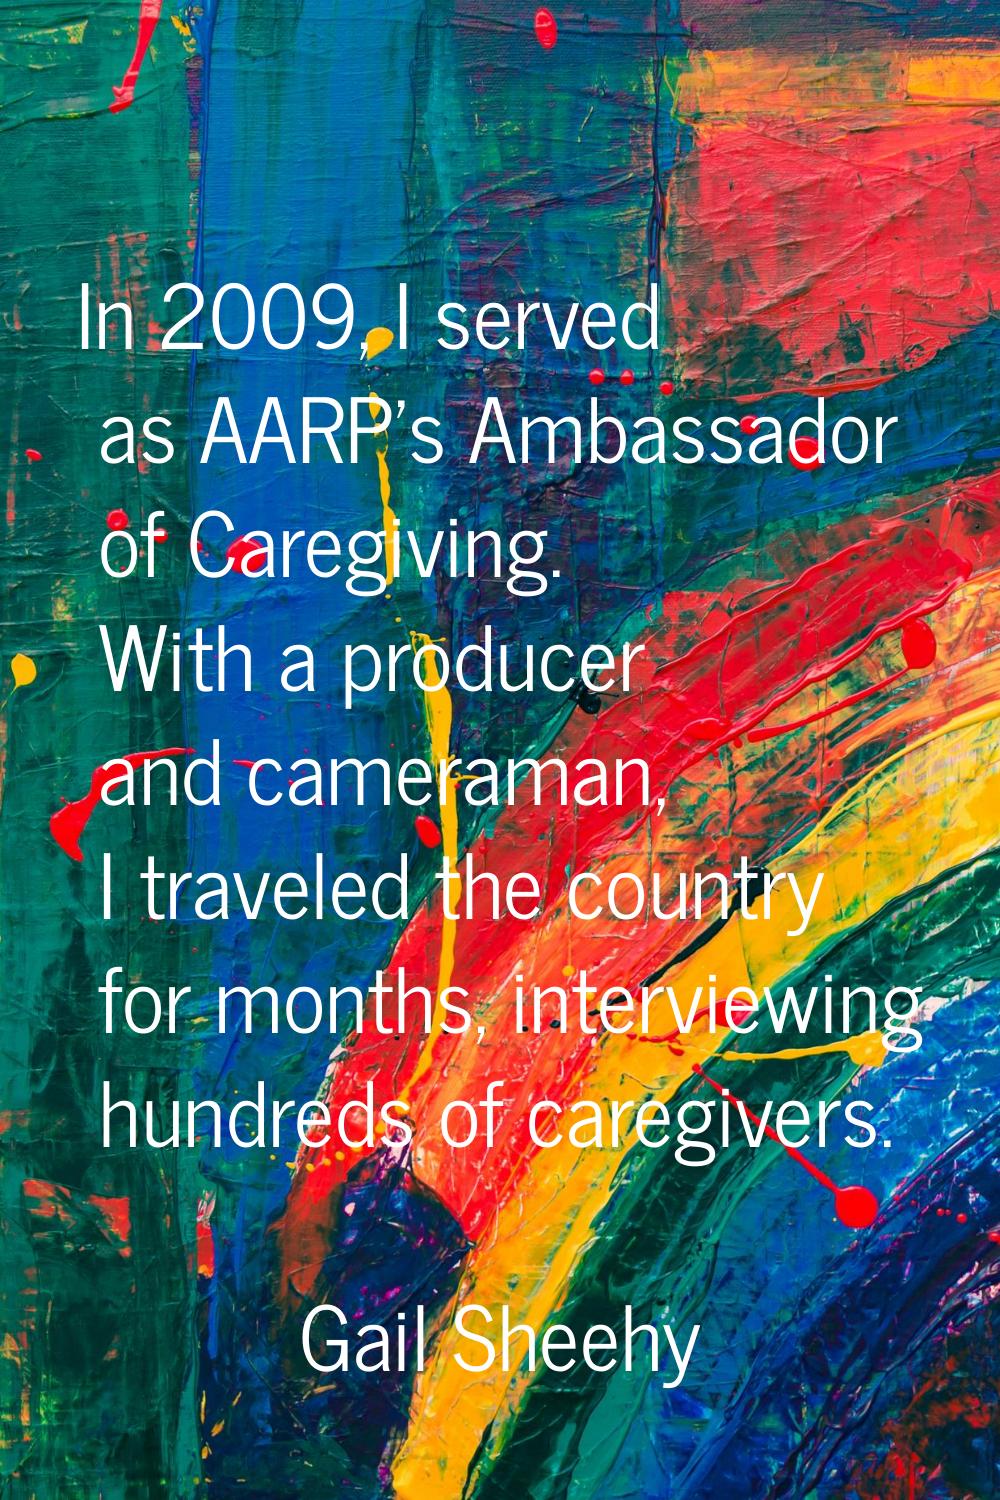 In 2009, I served as AARP's Ambassador of Caregiving. With a producer and cameraman, I traveled the